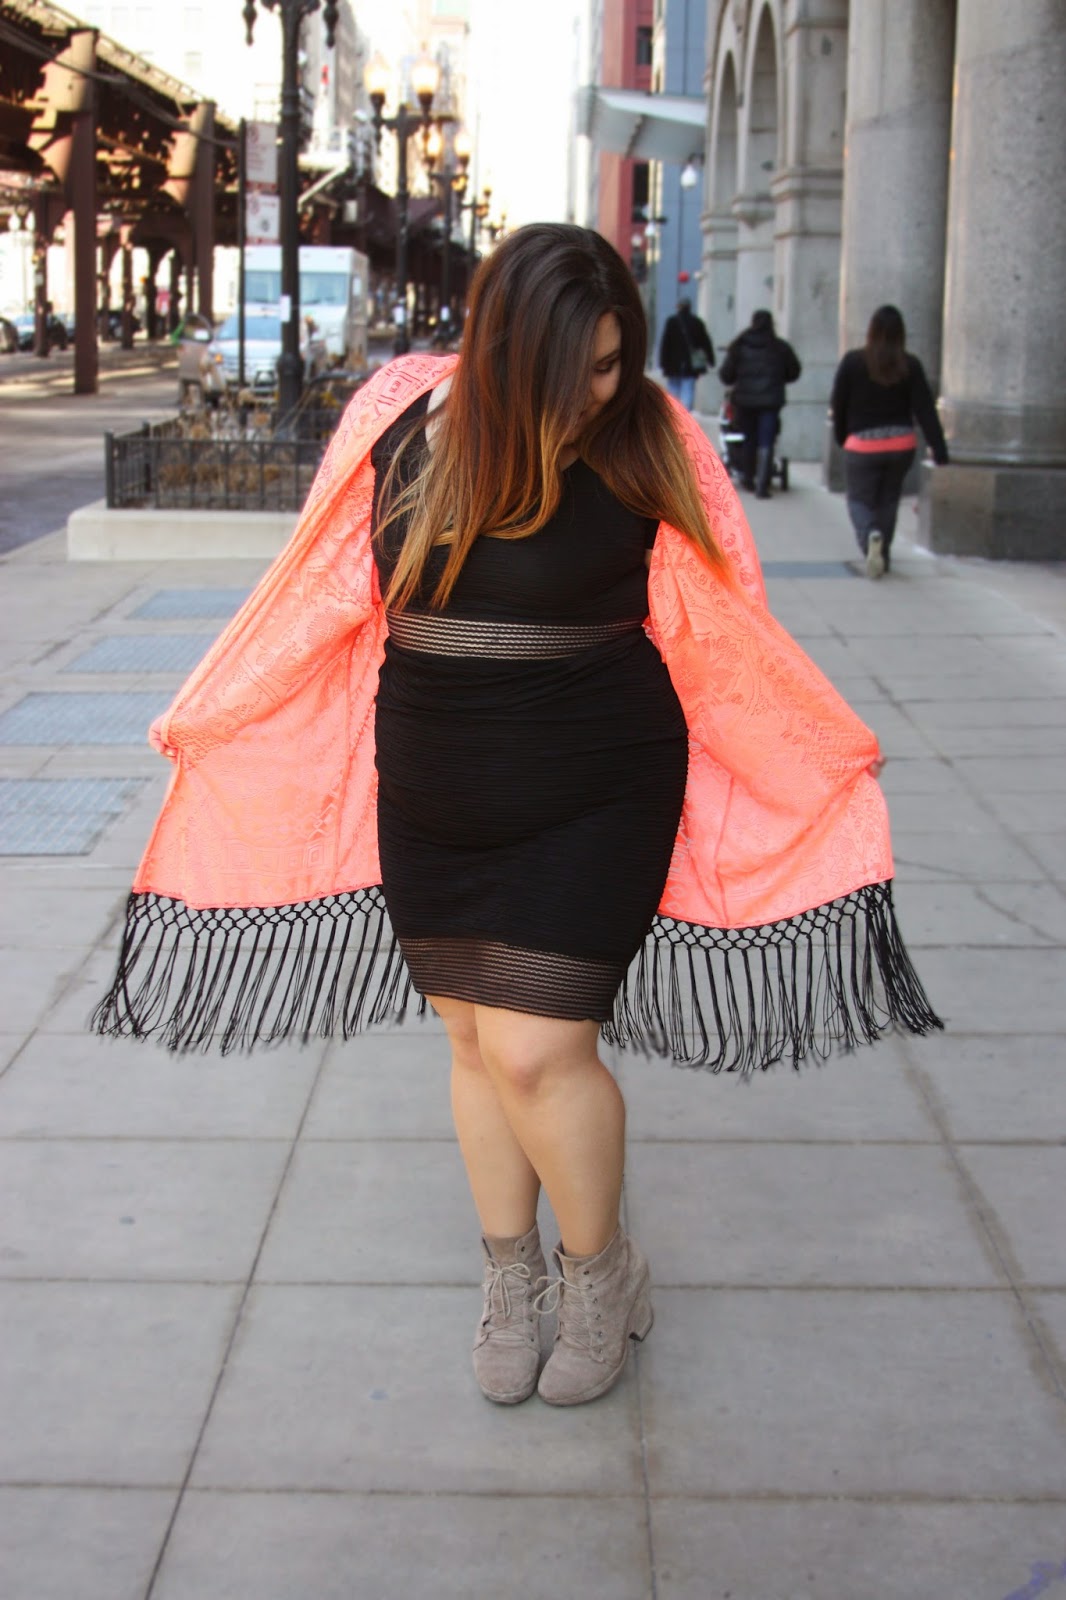 BRIGHT COLORED kimono, Charlotte Russe, Charlotte Russe plus size clothing line, Chicago, LITTLE BLACK DRESS, maxi skirt, Natalie Craig, natalie in the city, plus size, plus size fashion blogger, chicago, kimono, fringe, ankle boots, booties, see-through, fatshion, curvy women, bbw, summer bright color